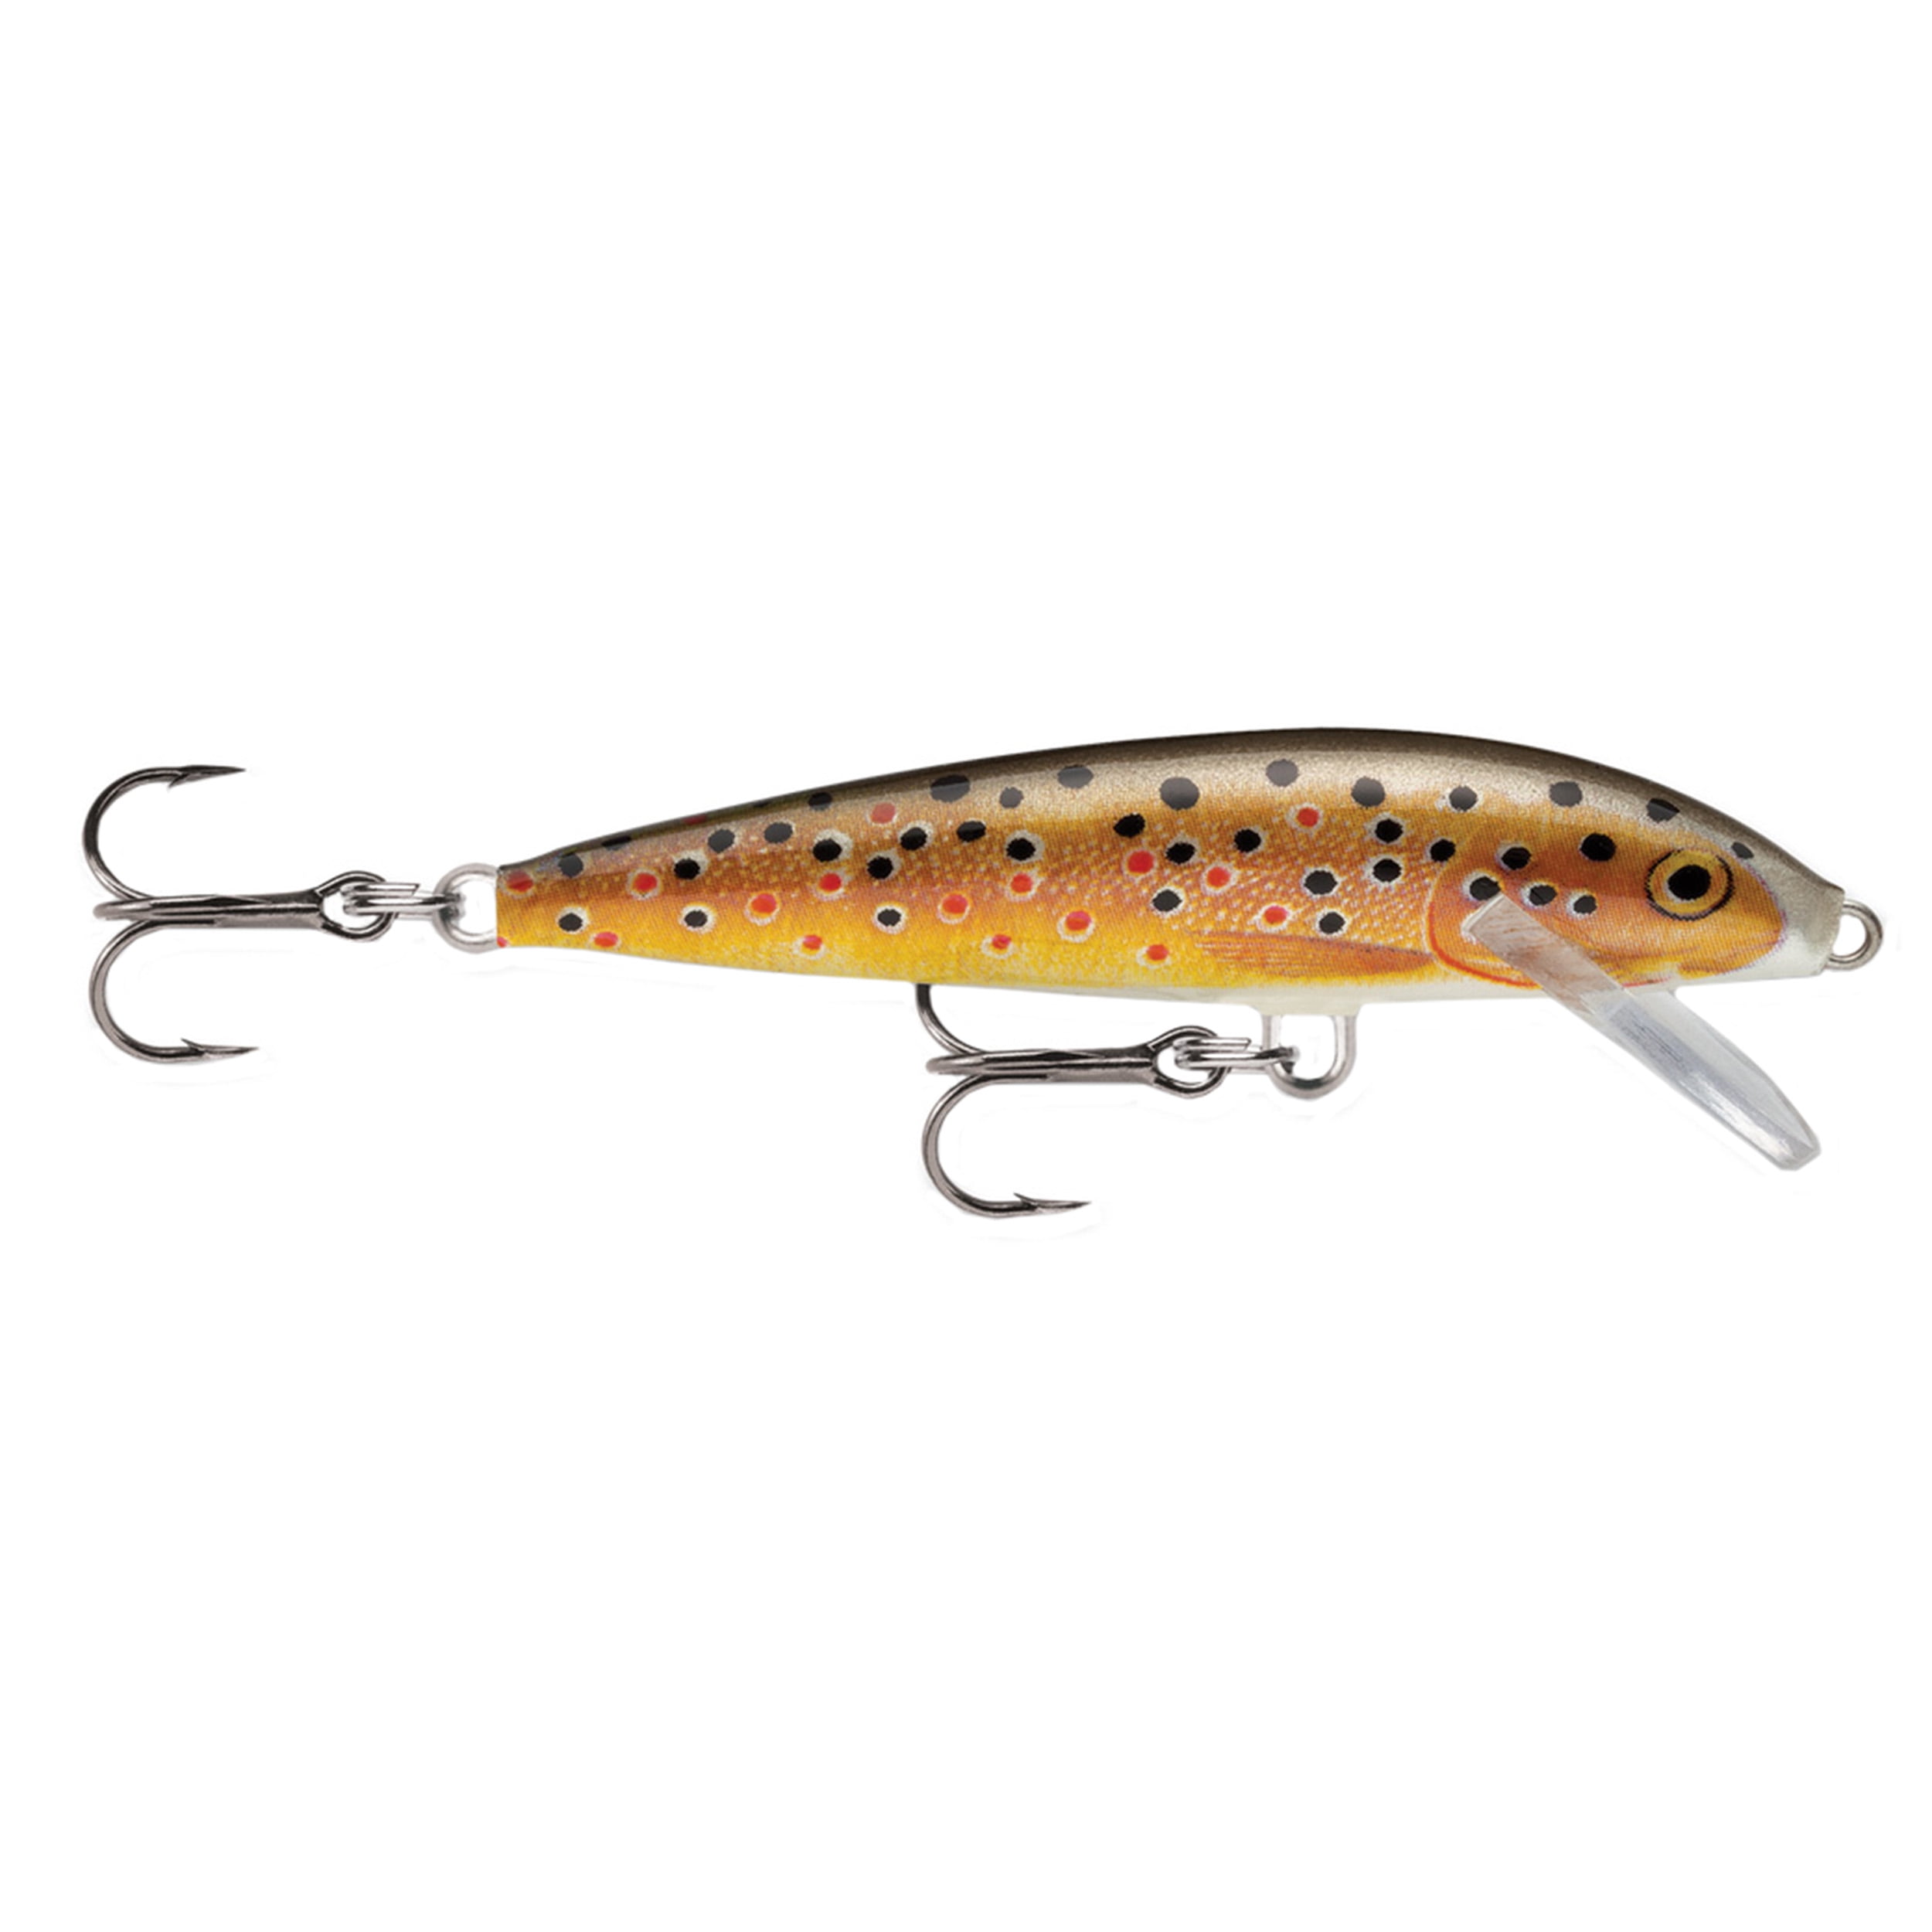 Rapala Original Floater 05 Fishing Lure 2in Brown Trout for sale online